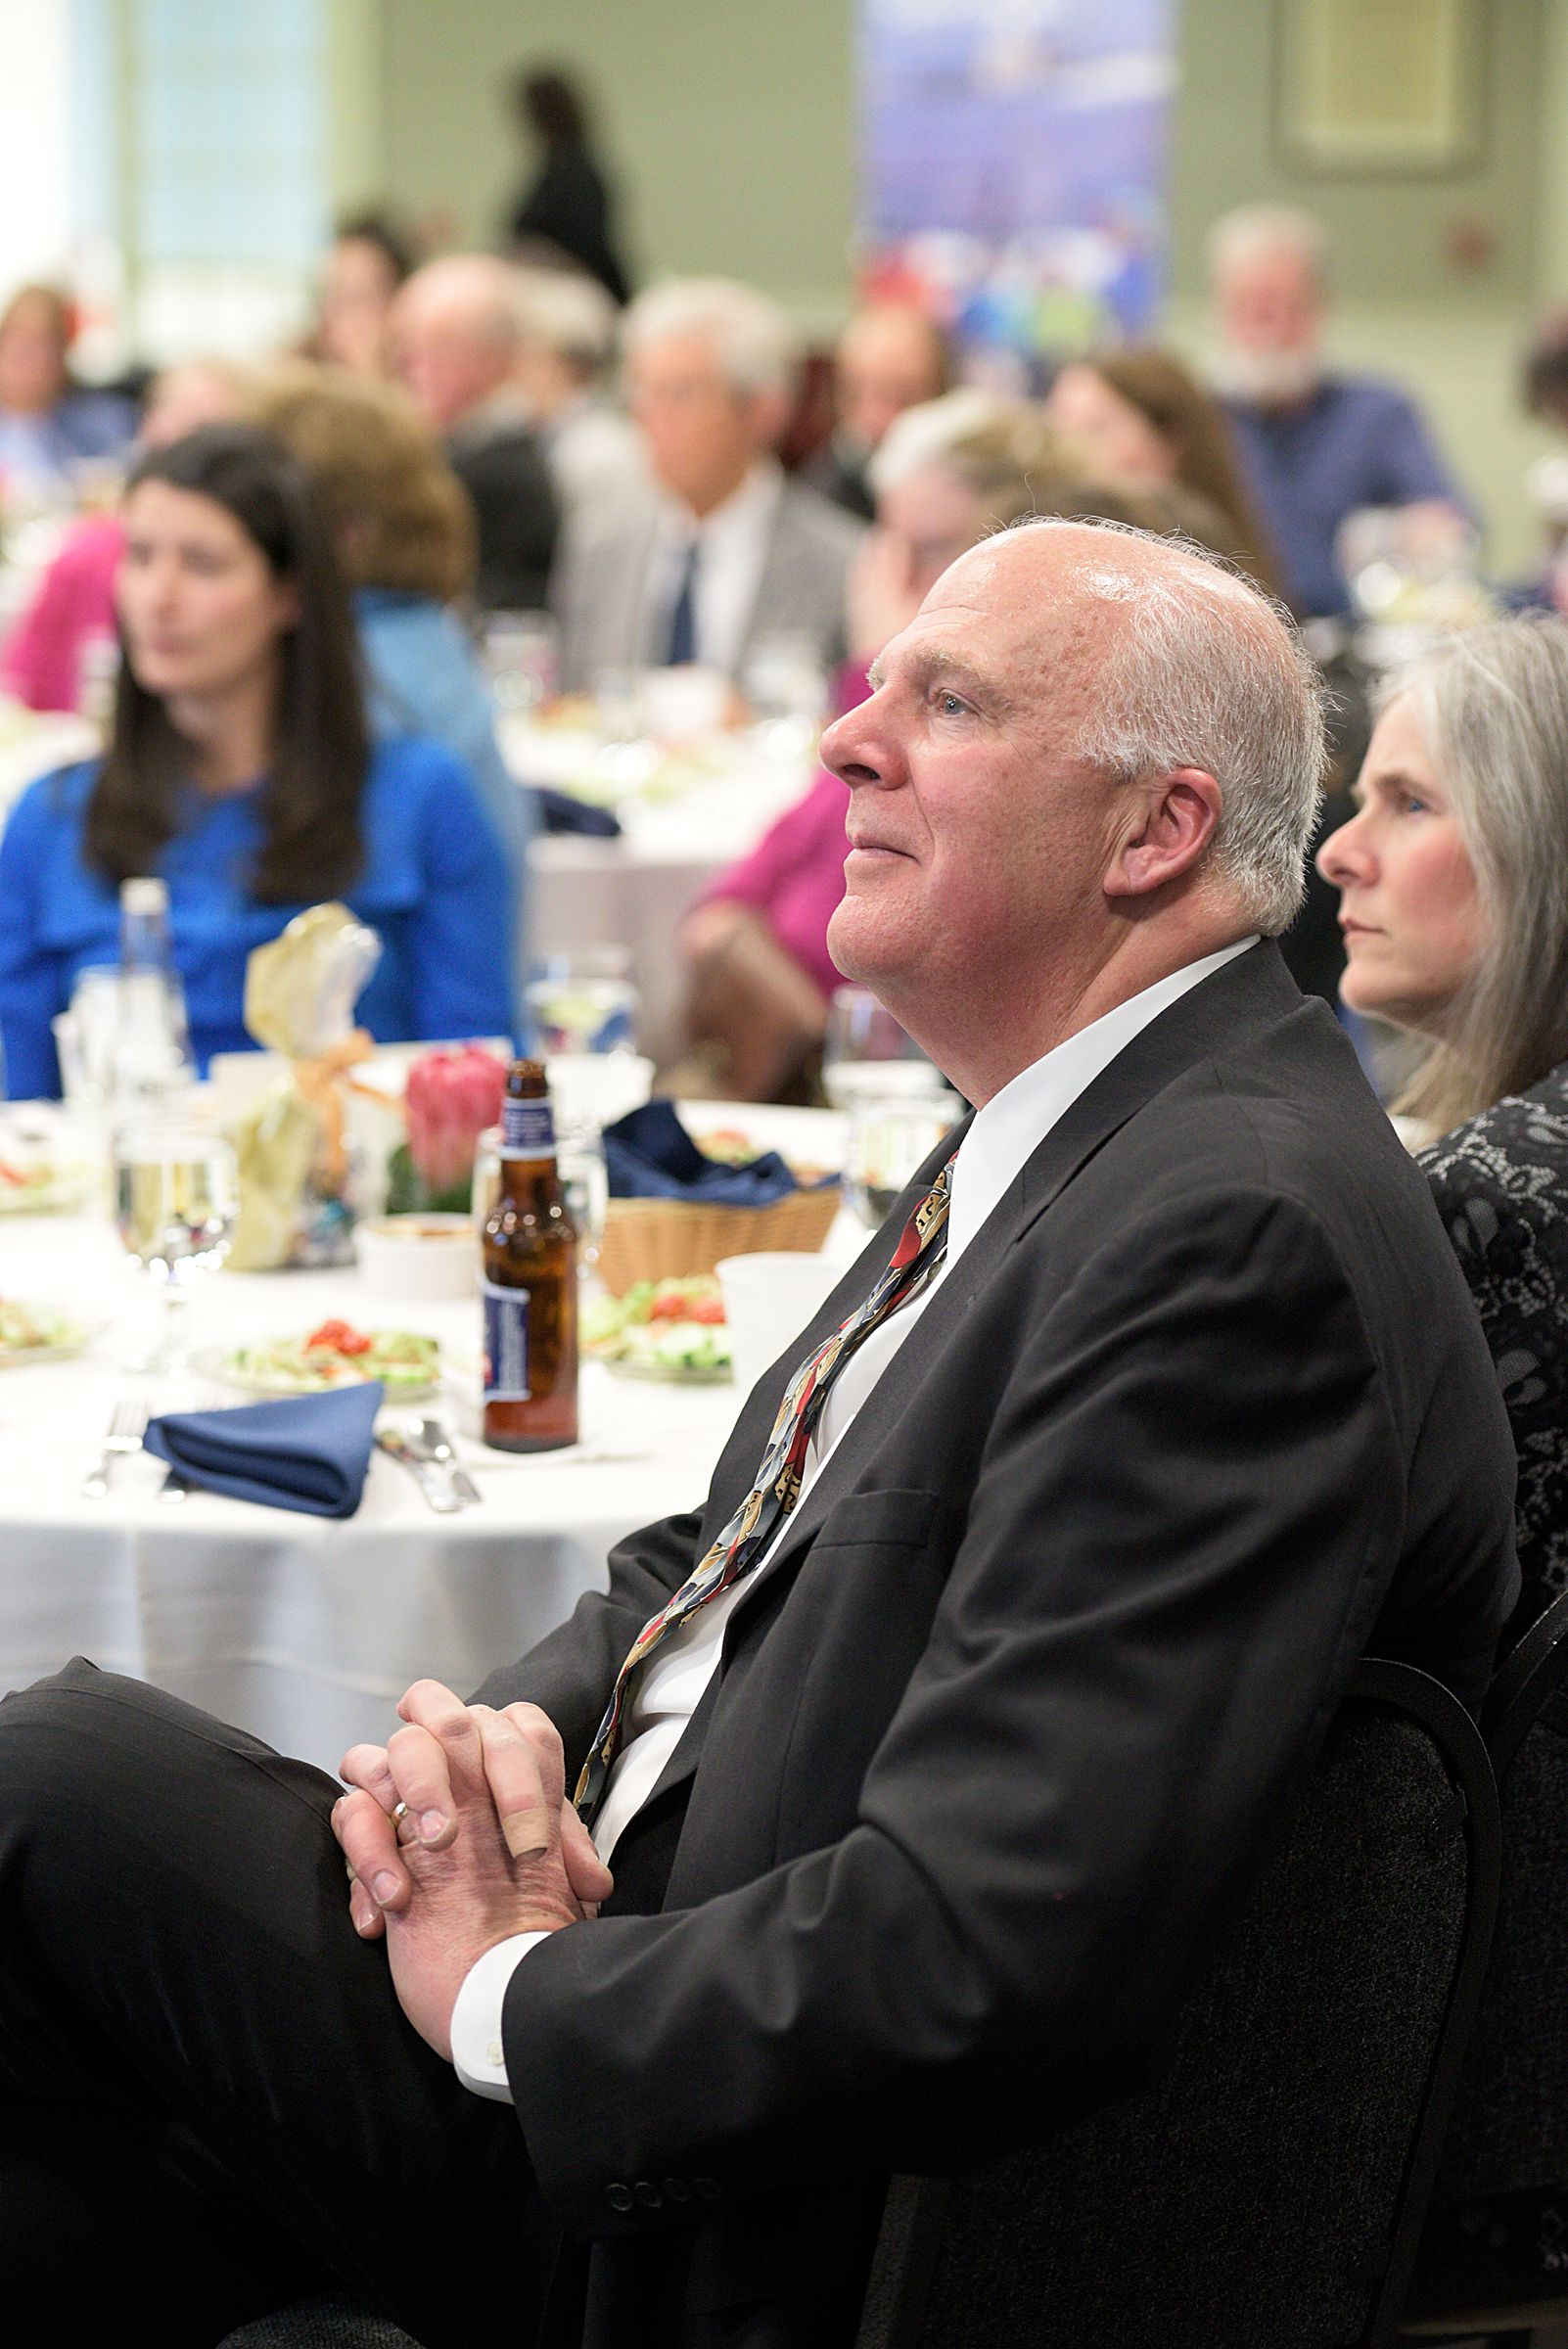 Rich Marshall, of New London, listens to the annual report of Lake Sunapee Region Chamber of Commerce Dan O'Halloran during the Chamber's annual meeting at Colby-Sawyer College in New London, N.H., Tuesday, January 17, 2017. After two years as vice president, Marshall took over the presidency from O'Halloran Wednesday night. (Valley News - James M. Patterson) Copyright Valley News. May not be reprinted or used online without permission. Send requests to permission@vnews.com.